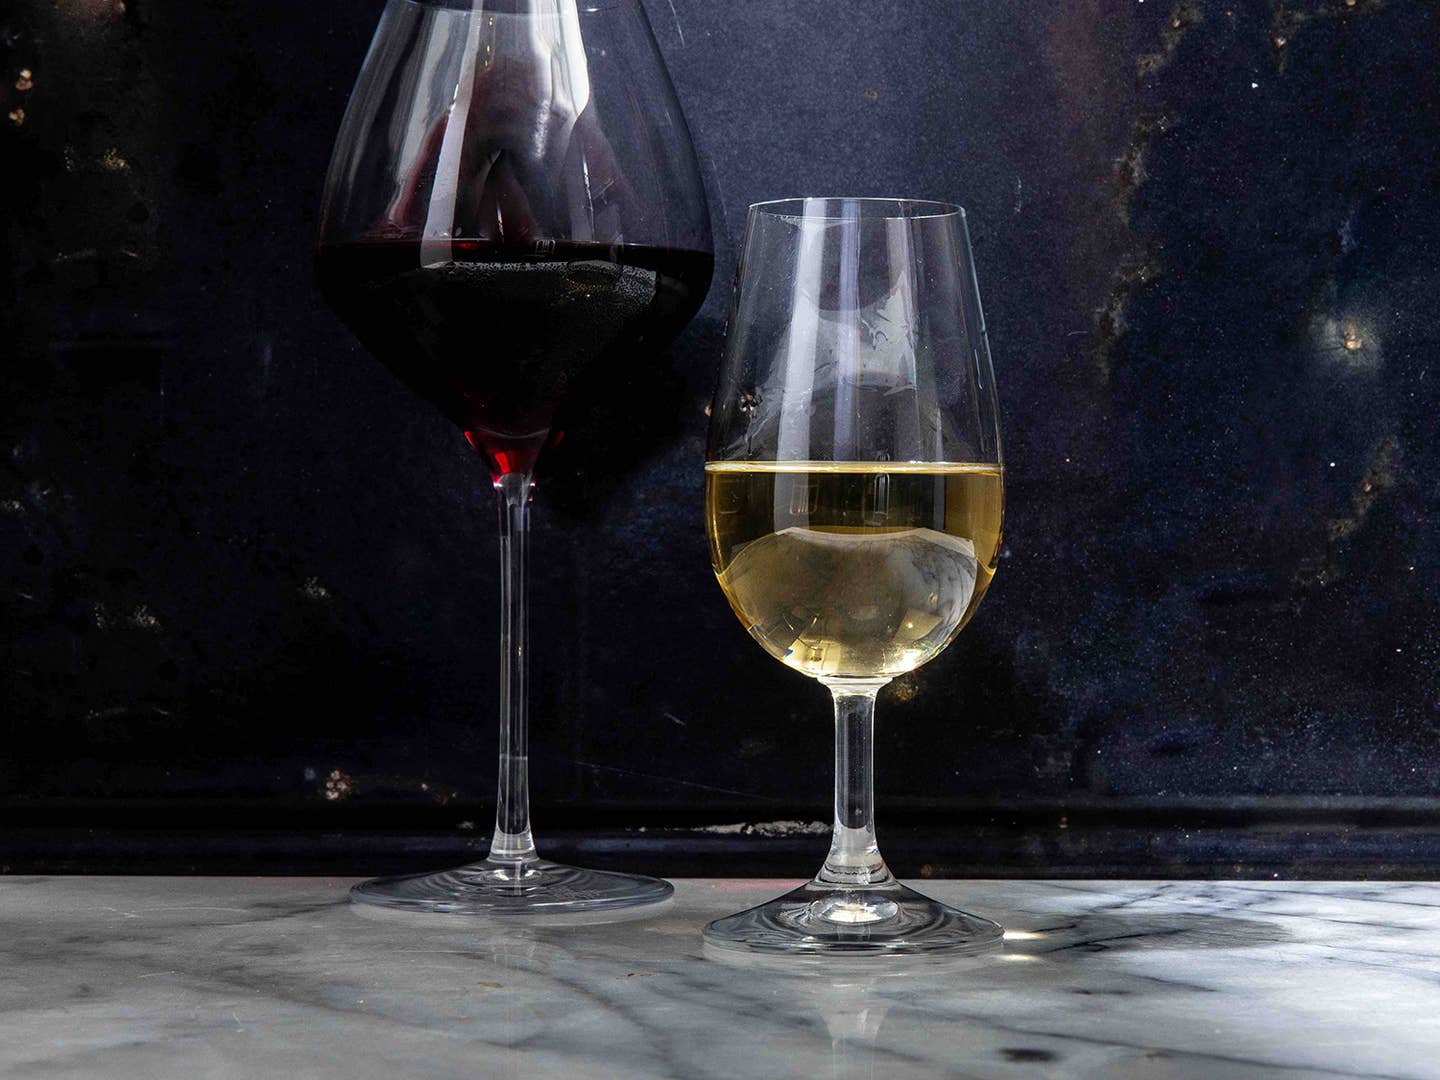 Tiny Wine Glasses Have Won Us Over. Here’s Why